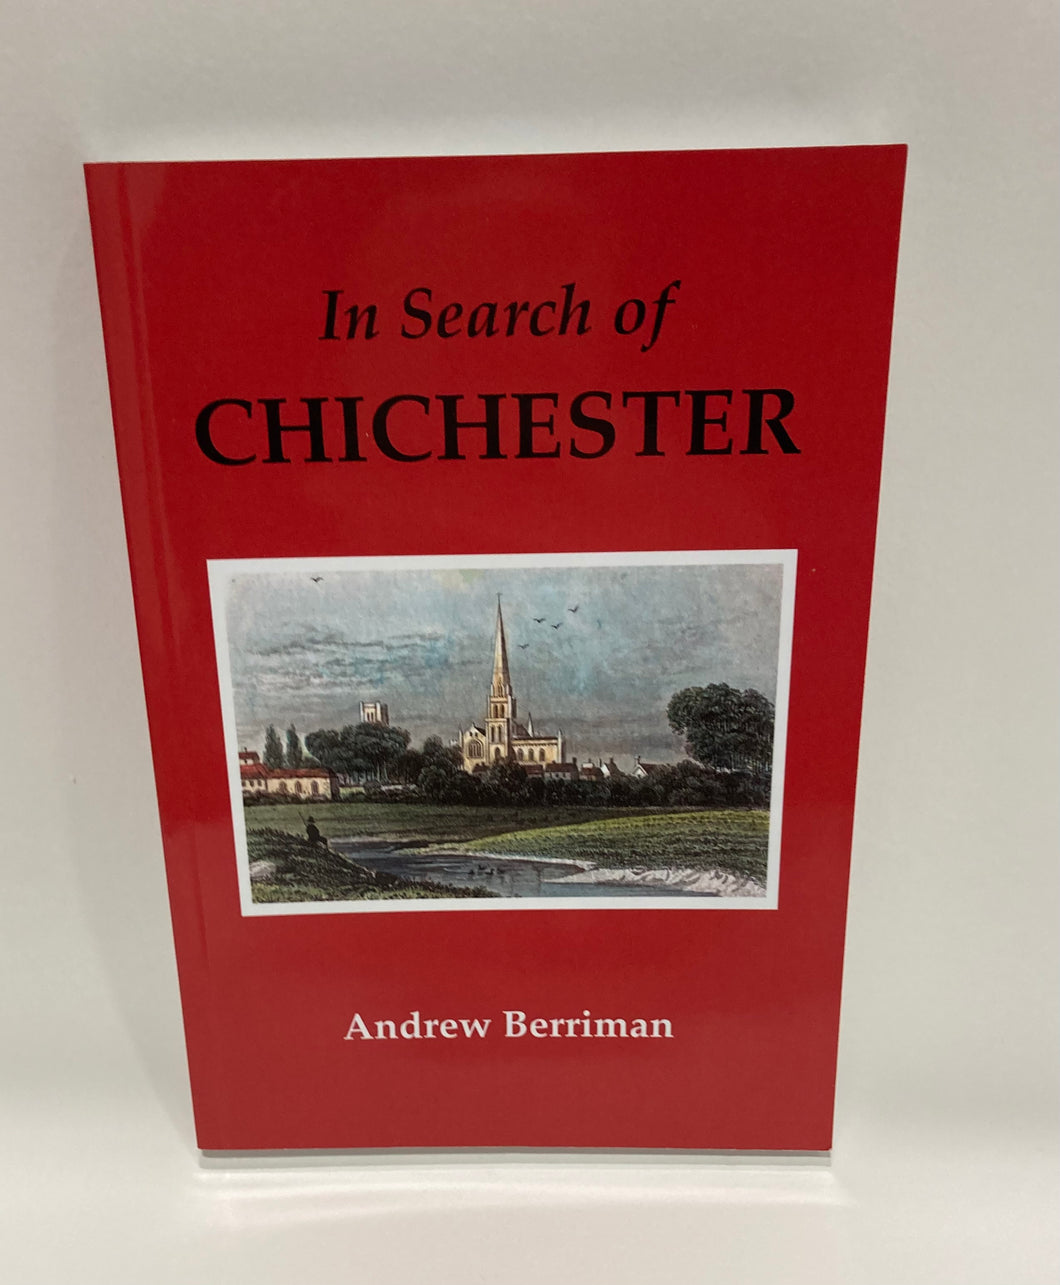 In Search of Chichester